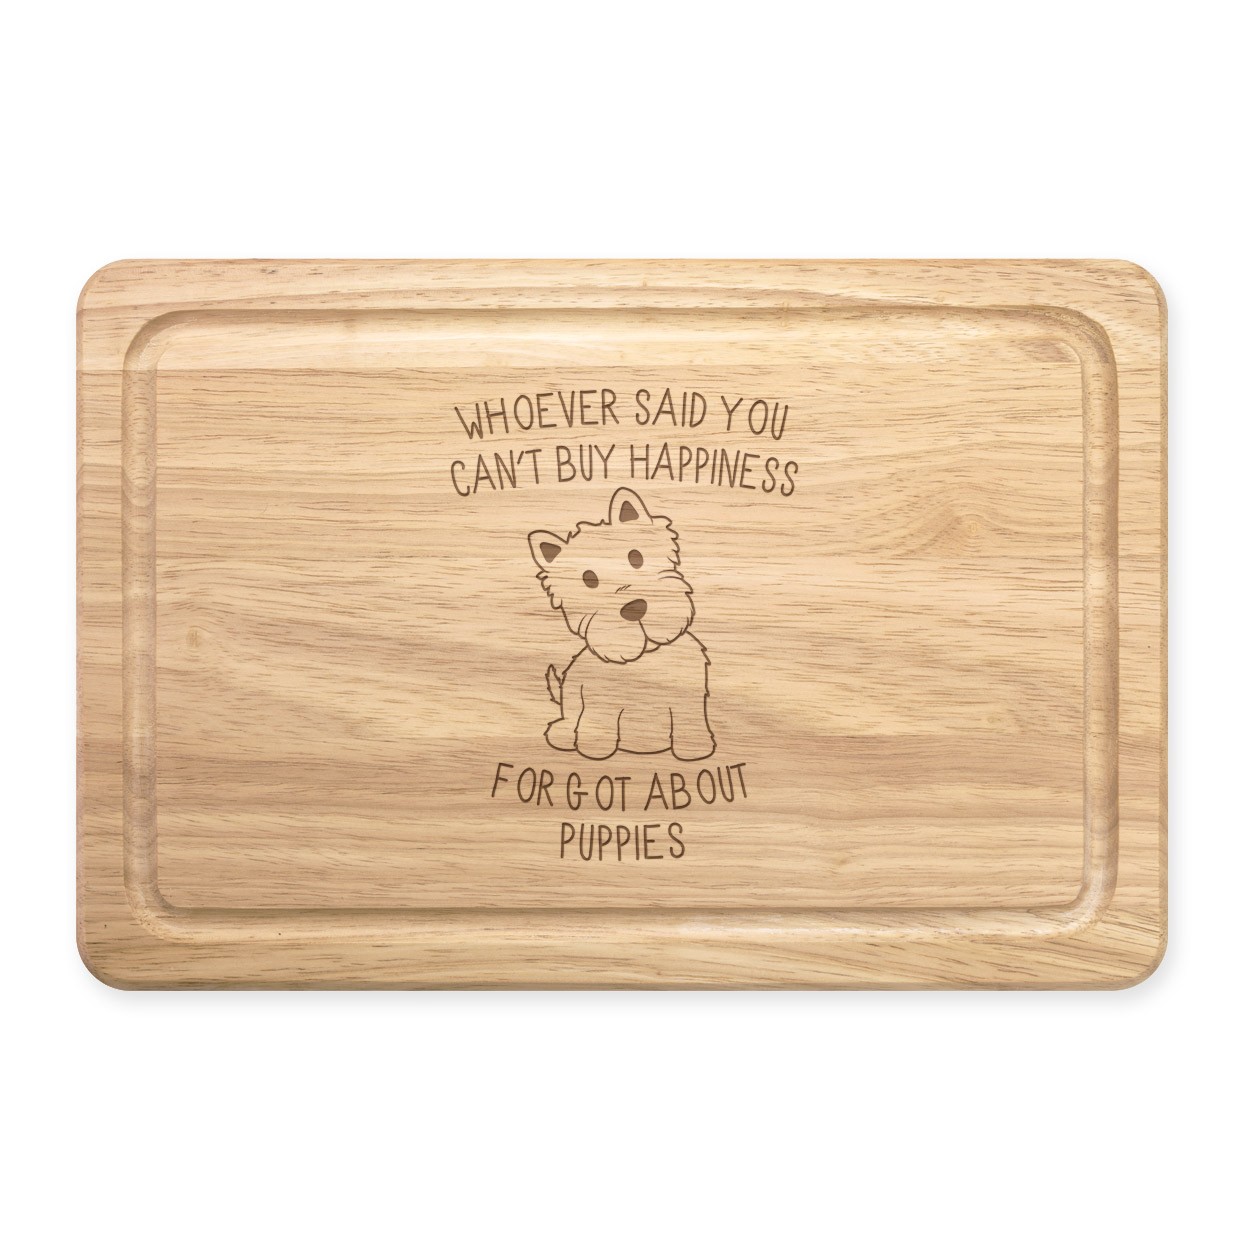 Whoever Said You Can't Buy Happiness Forgot About Puppies Rectangular Wooden Chopping Board